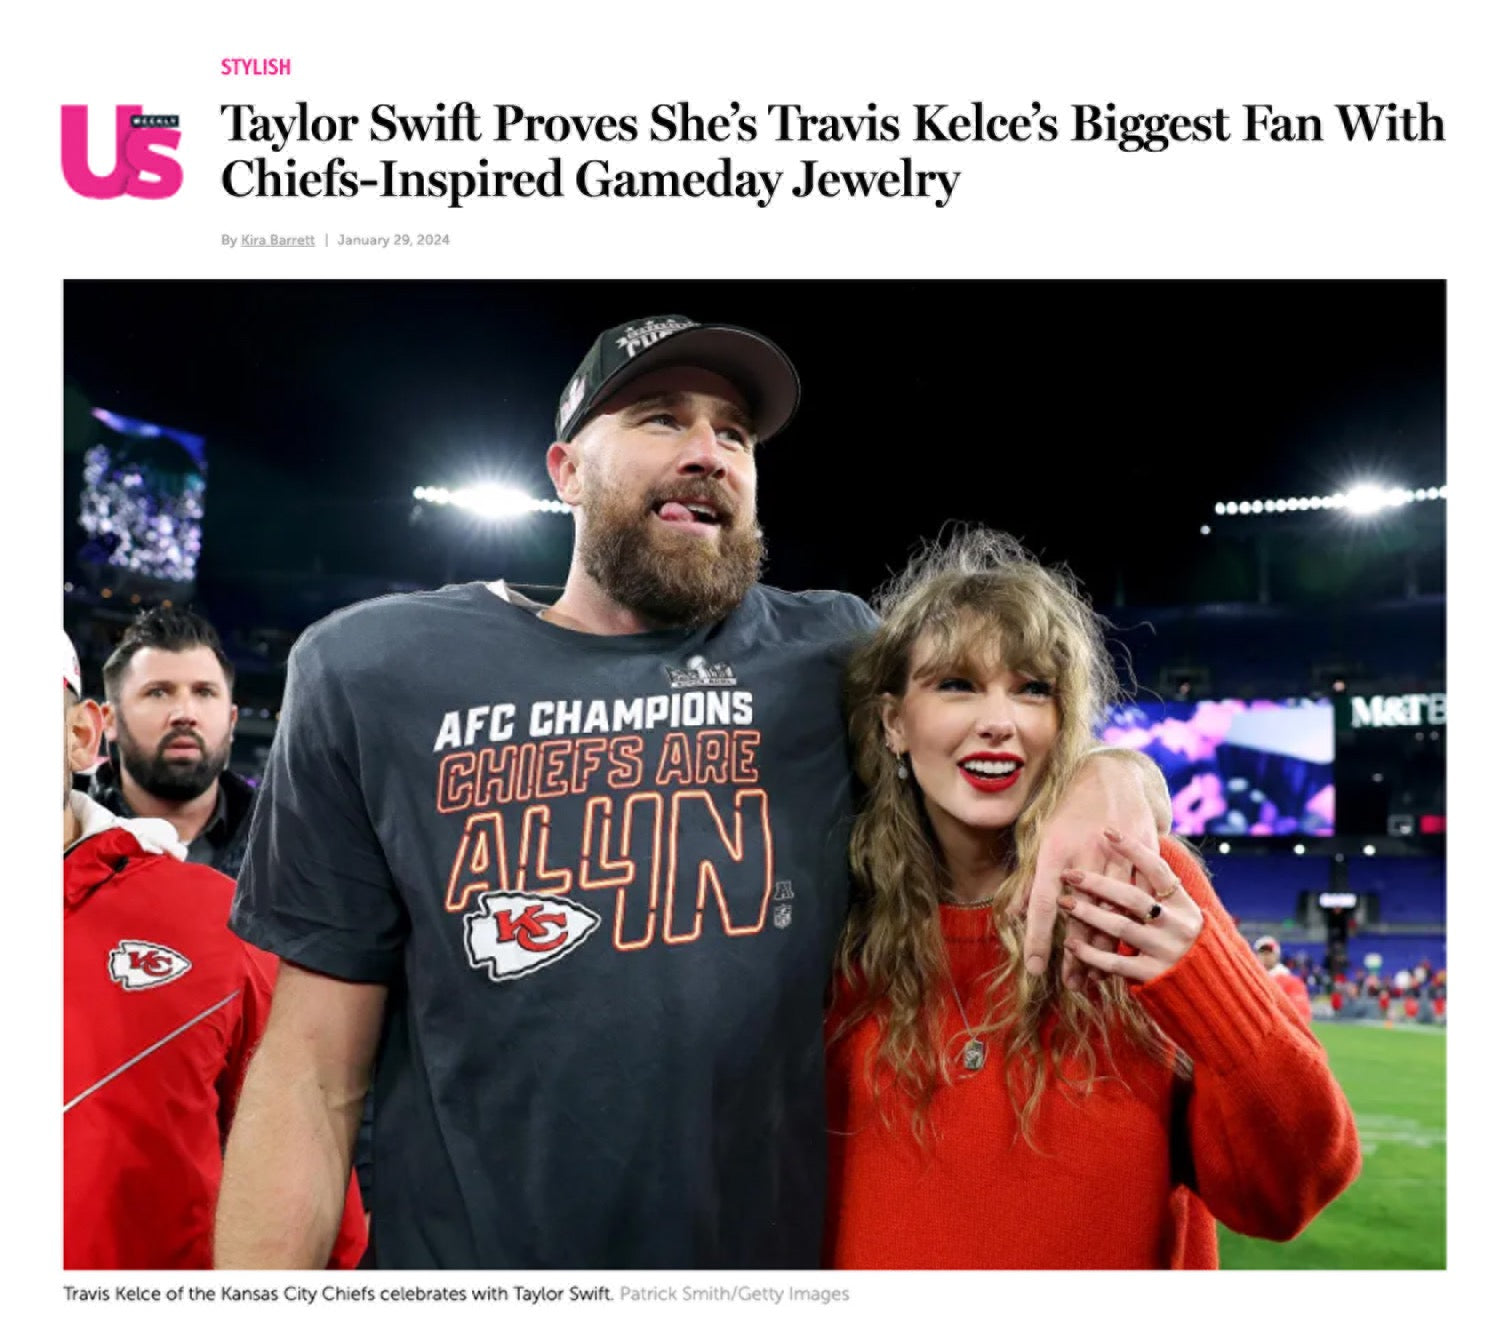 US Weekly | Taylor Swift Proves She’s Travis Kelce’s Biggest Fan With Chiefs-Inspired Gameday Jewelry | Kira Barrett